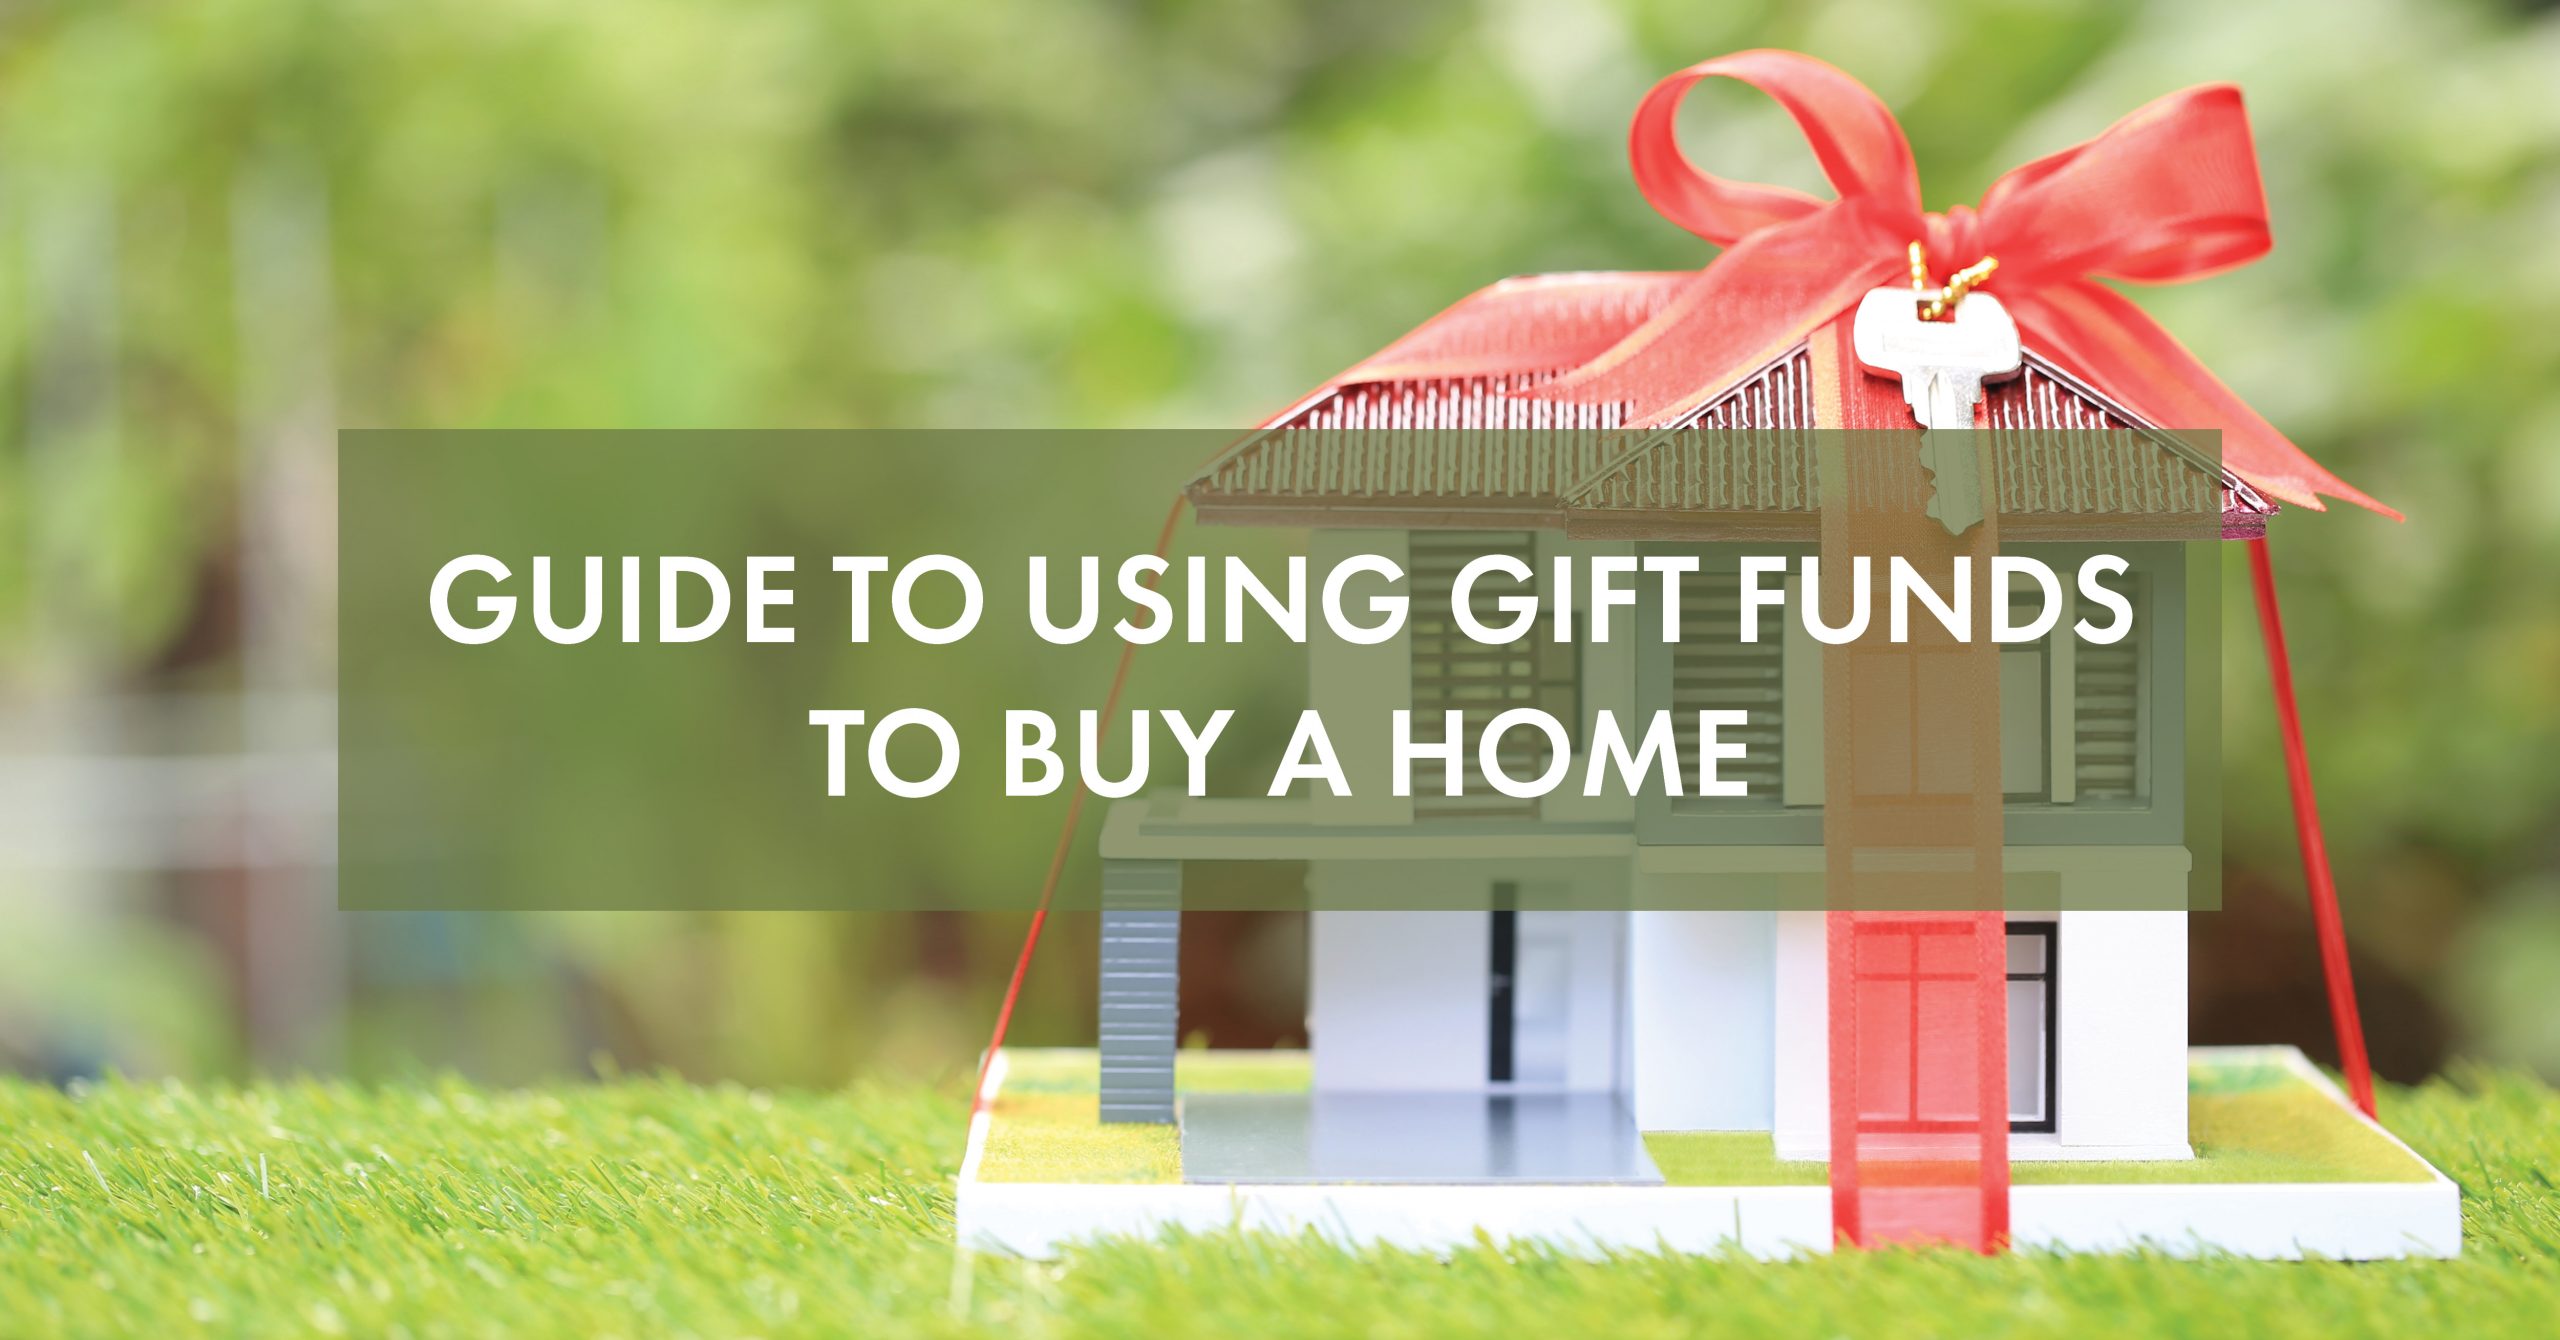 Guide to Using Gift Funds - Blog Image